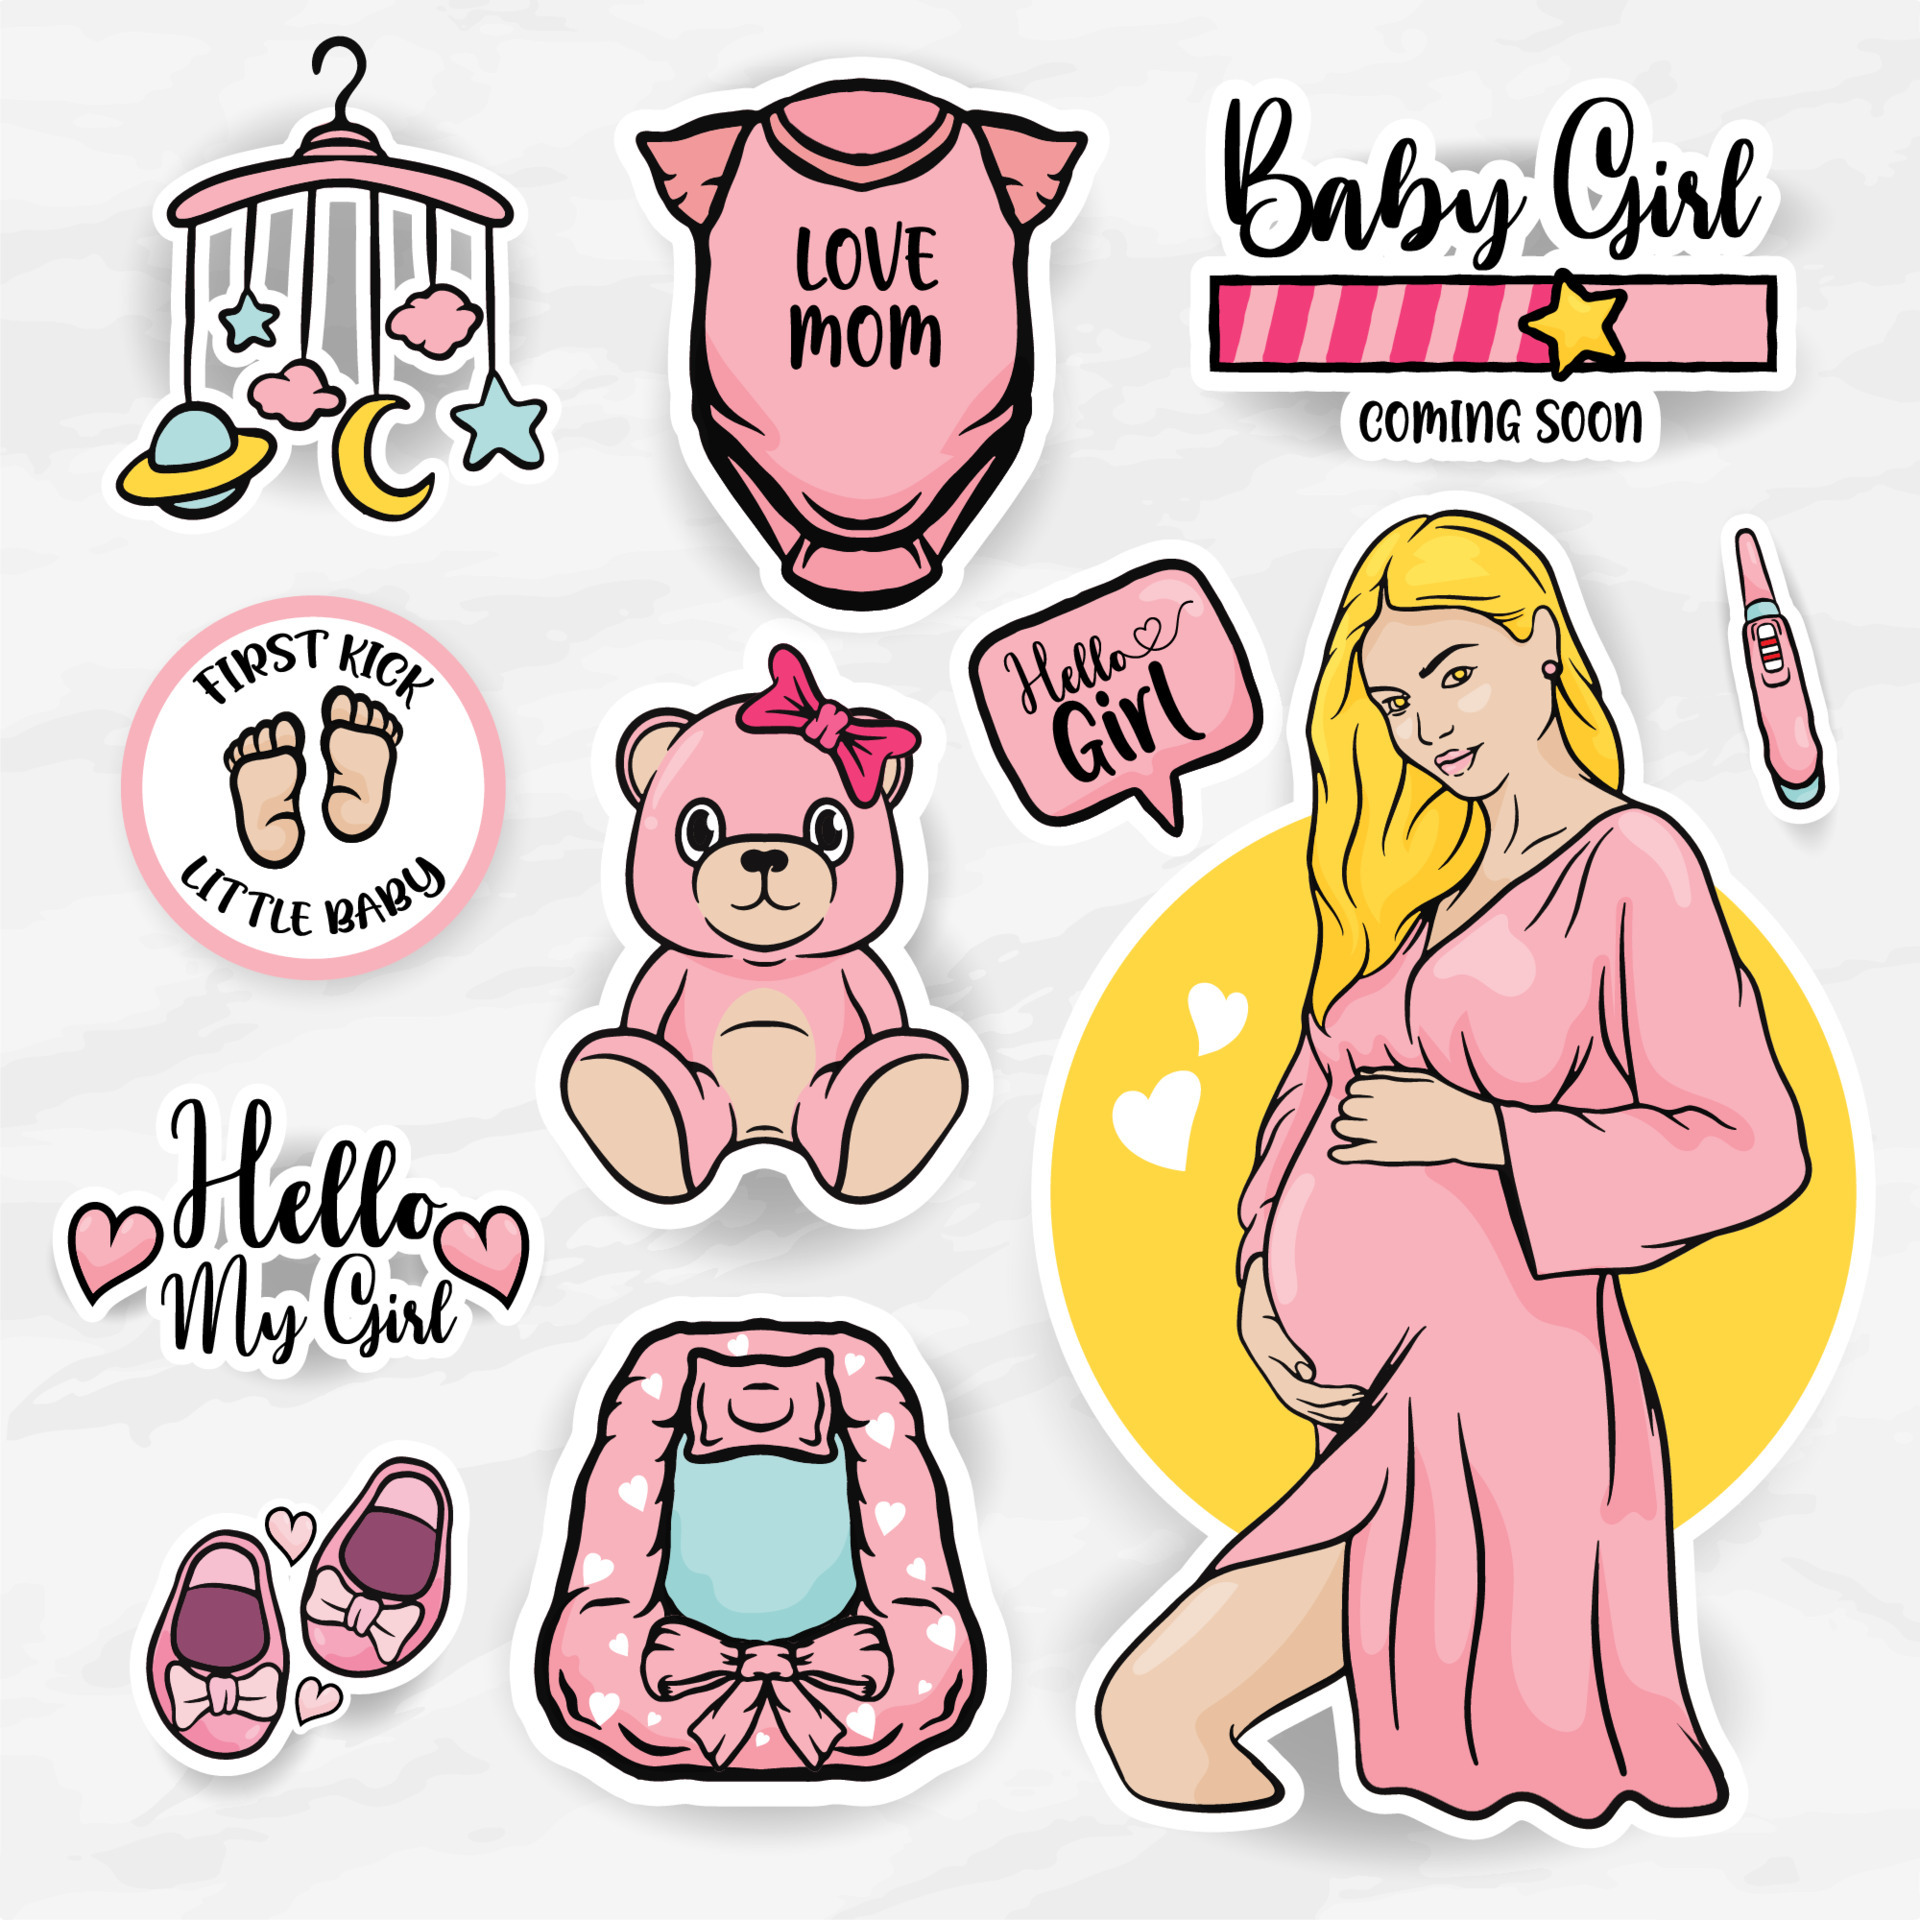 Premium Vector  Expecting a baby boy nursery clip art stickers for  scrapbooking